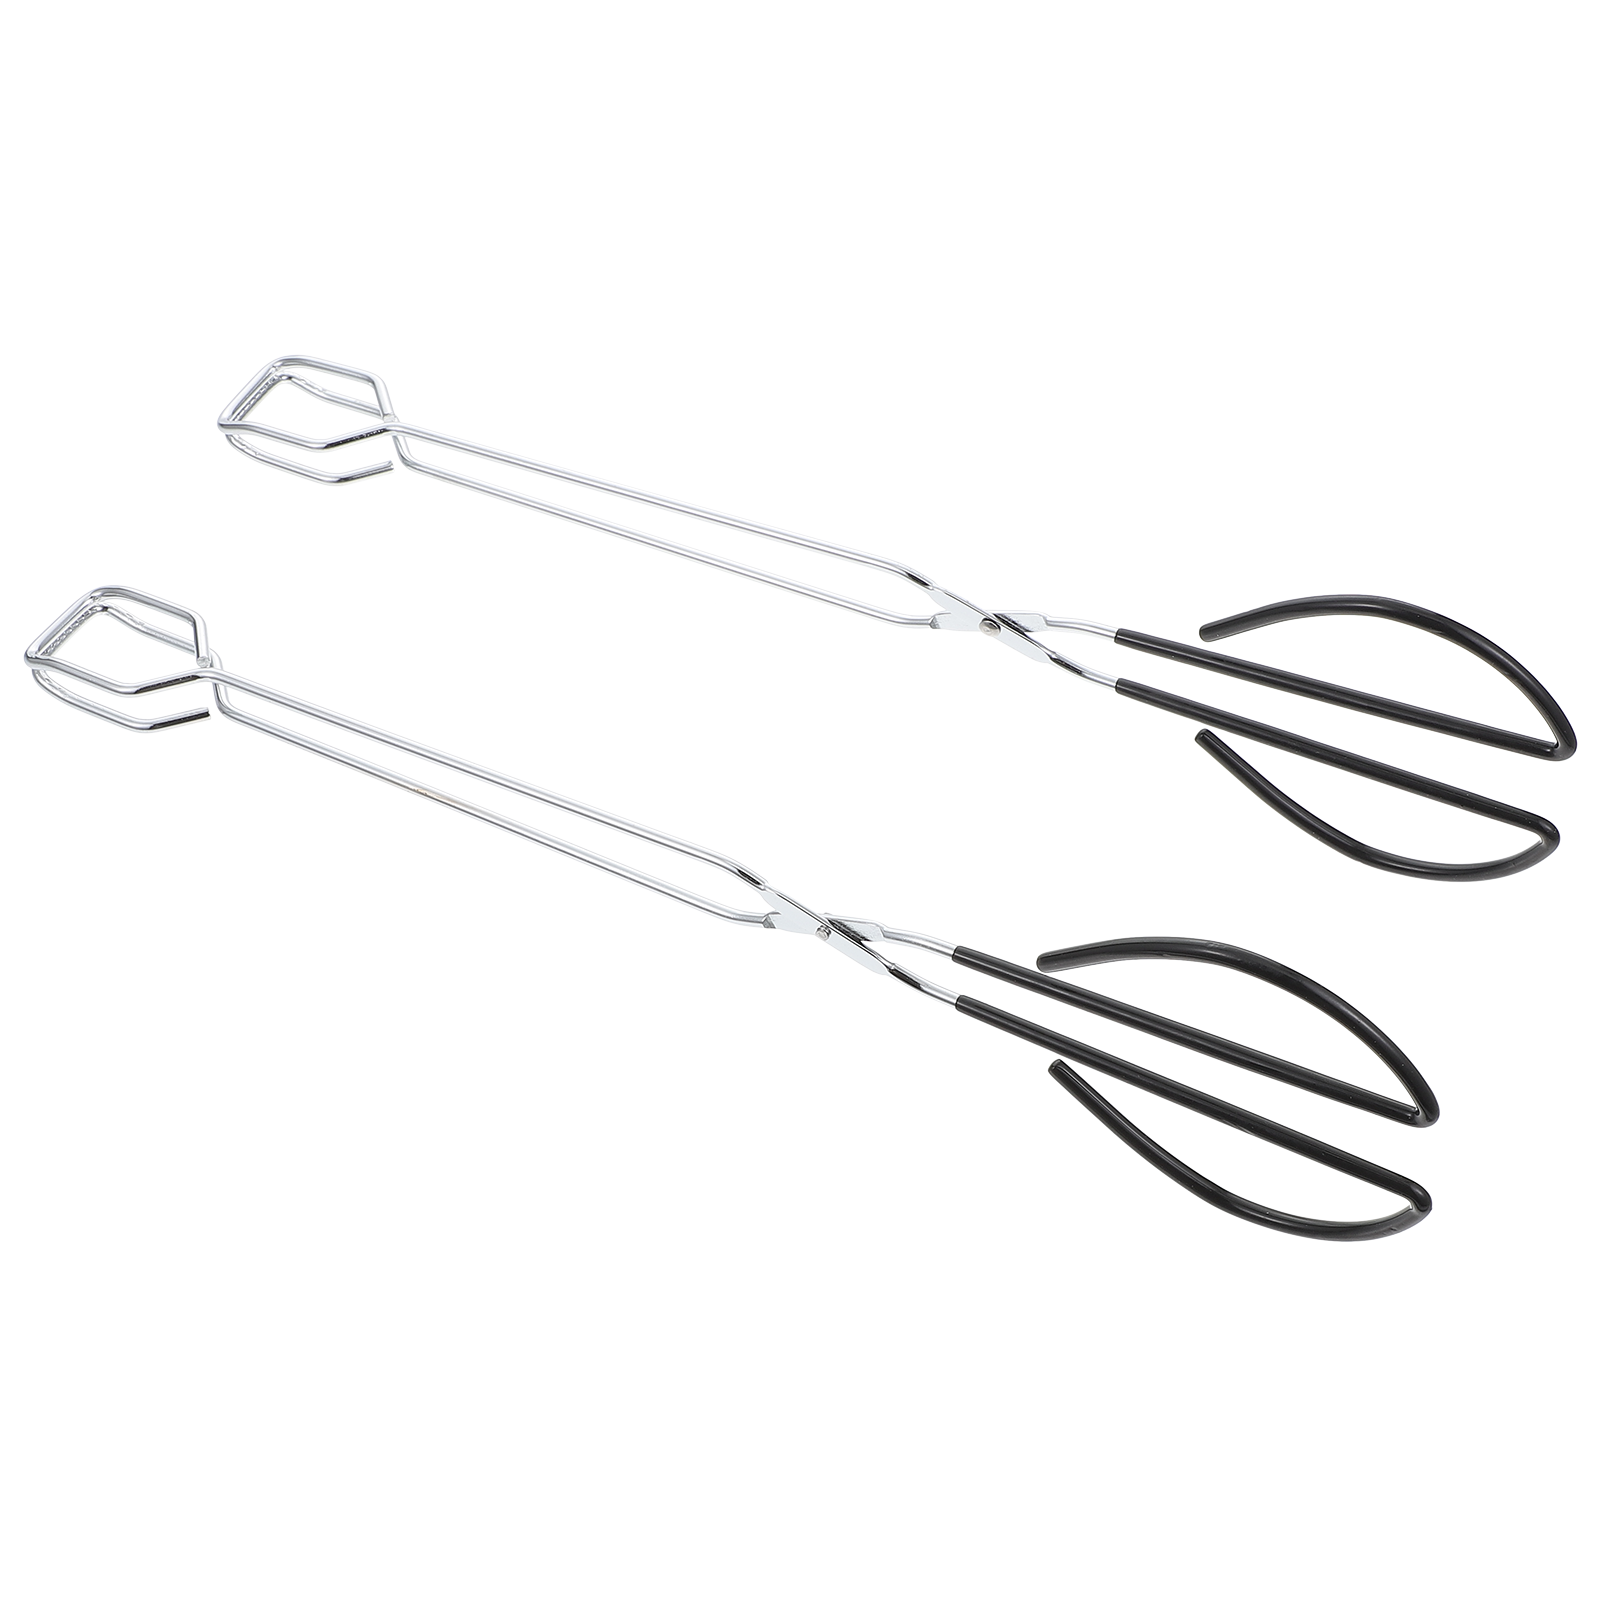 Stainless Steel Food Clip, Food Tong, Food Clamp, Barbecue Clip, Barbecue Clamp2Pcs Practical Food Clips Household Barbecue Tongs Steak Serving Clamps (Silver) - image 1 of 8